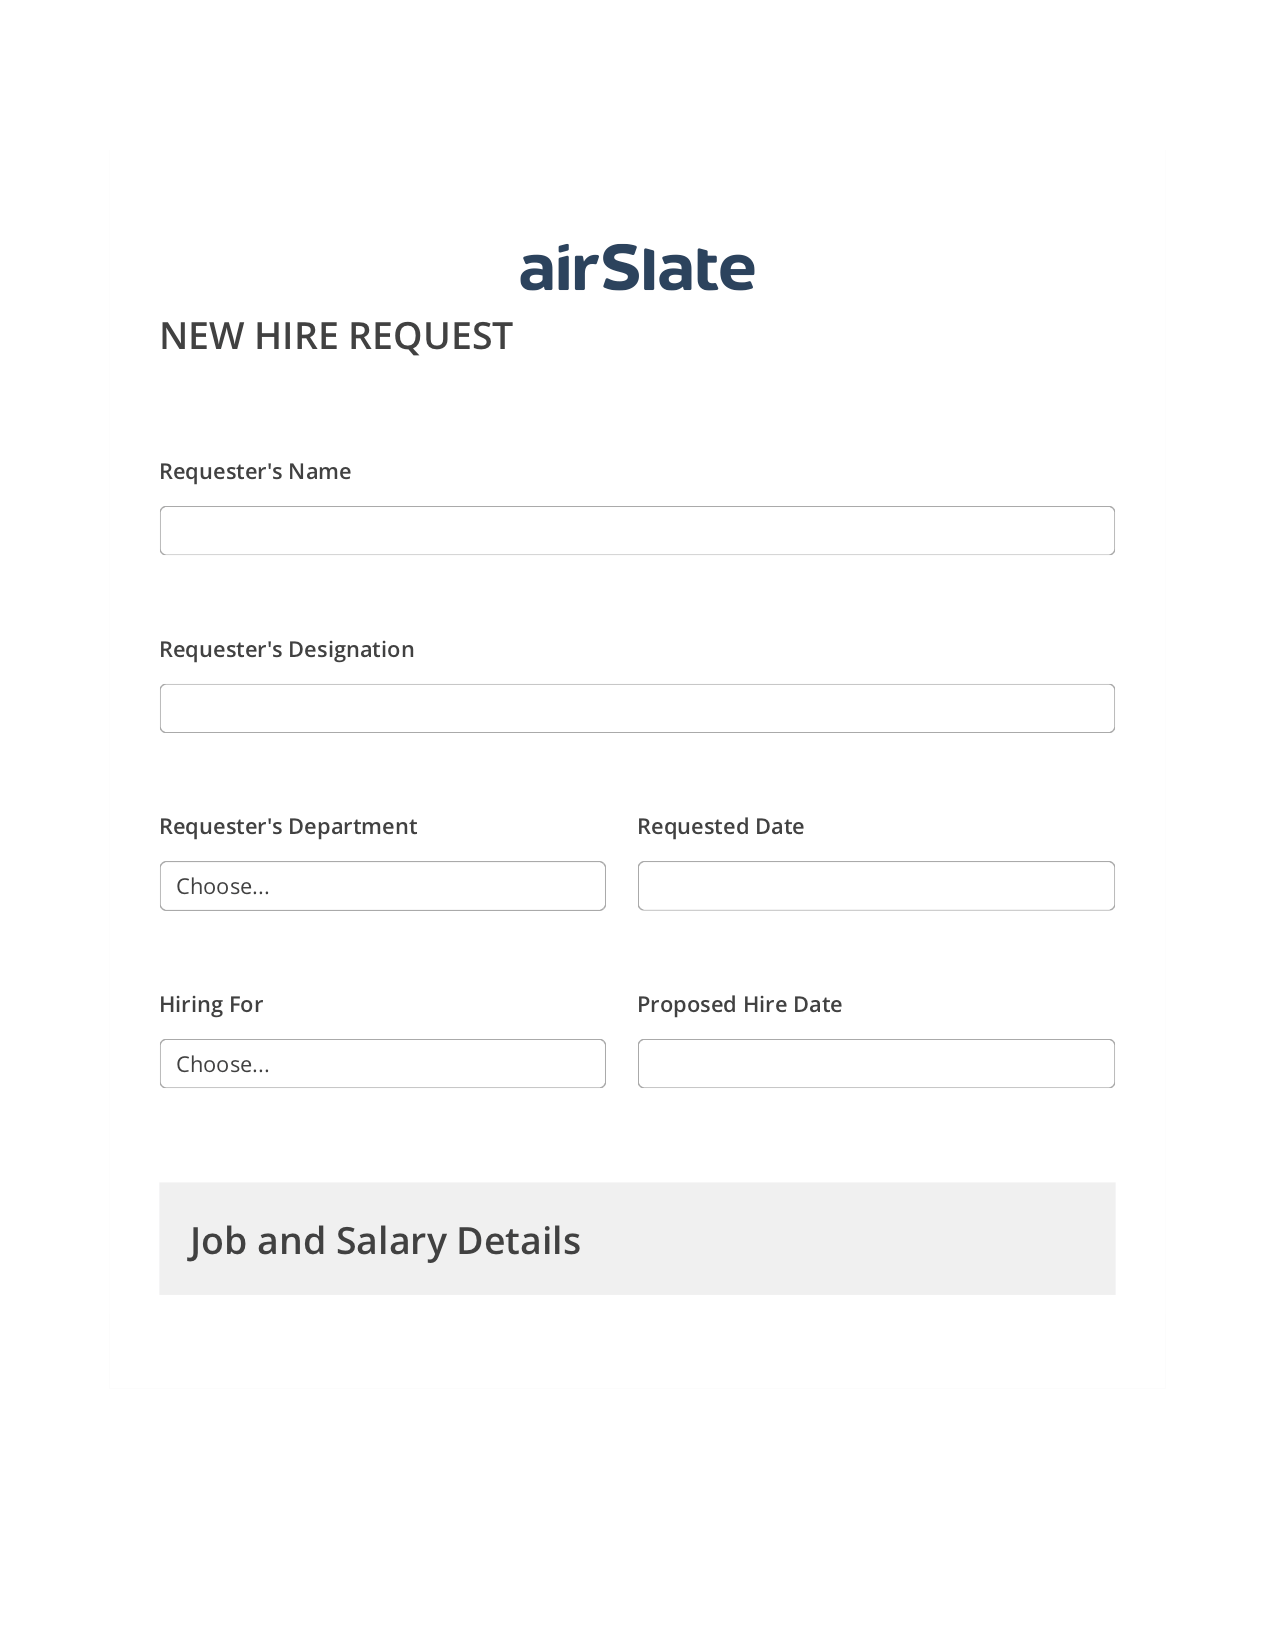 Hiring Request Workflow Pre-fill from Salesforce Records with SOQL Bot, Create QuickBooks Invoice Bot, Archive to Dropbox Bot